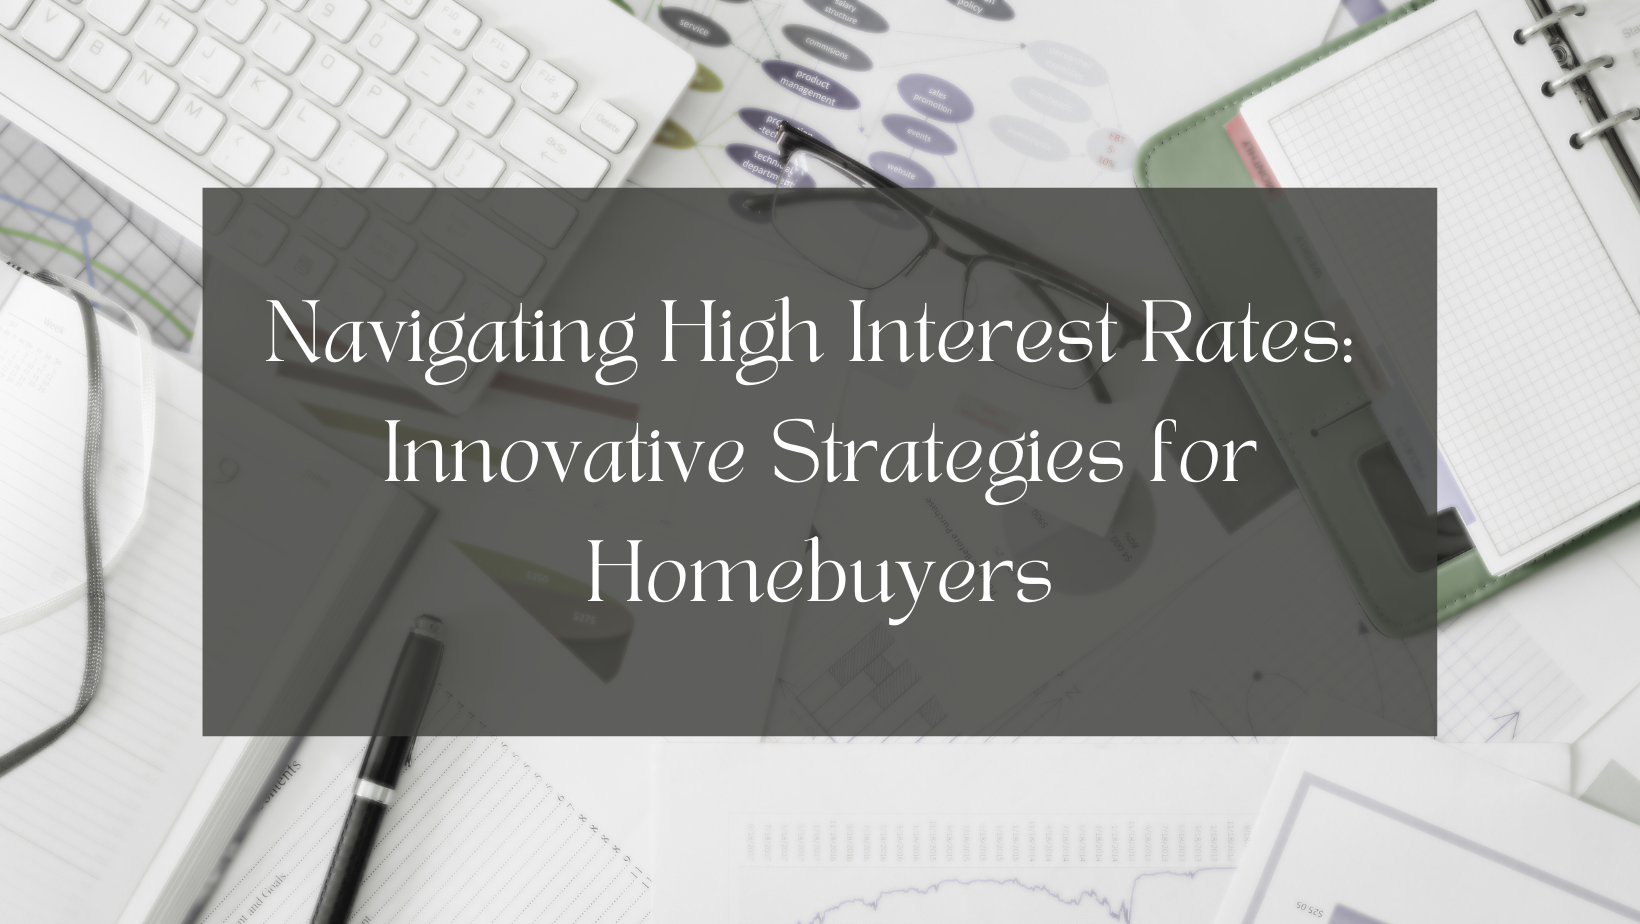 Navigating High Interest Rates: Innovative Strategies for Homebuyers